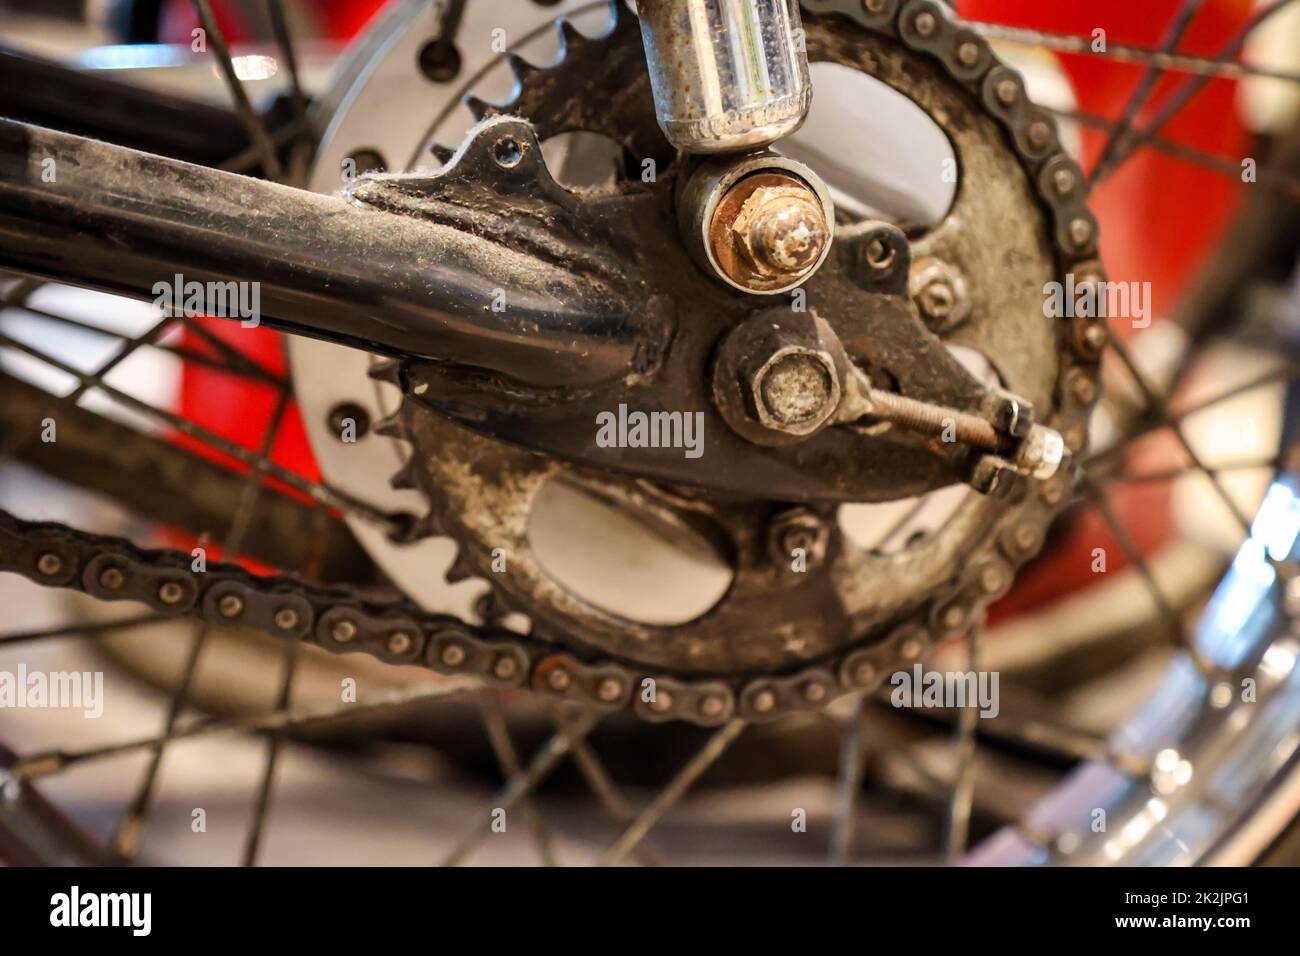 The rear wheel of a motorcycle with the gear for the drive. Stock Photo